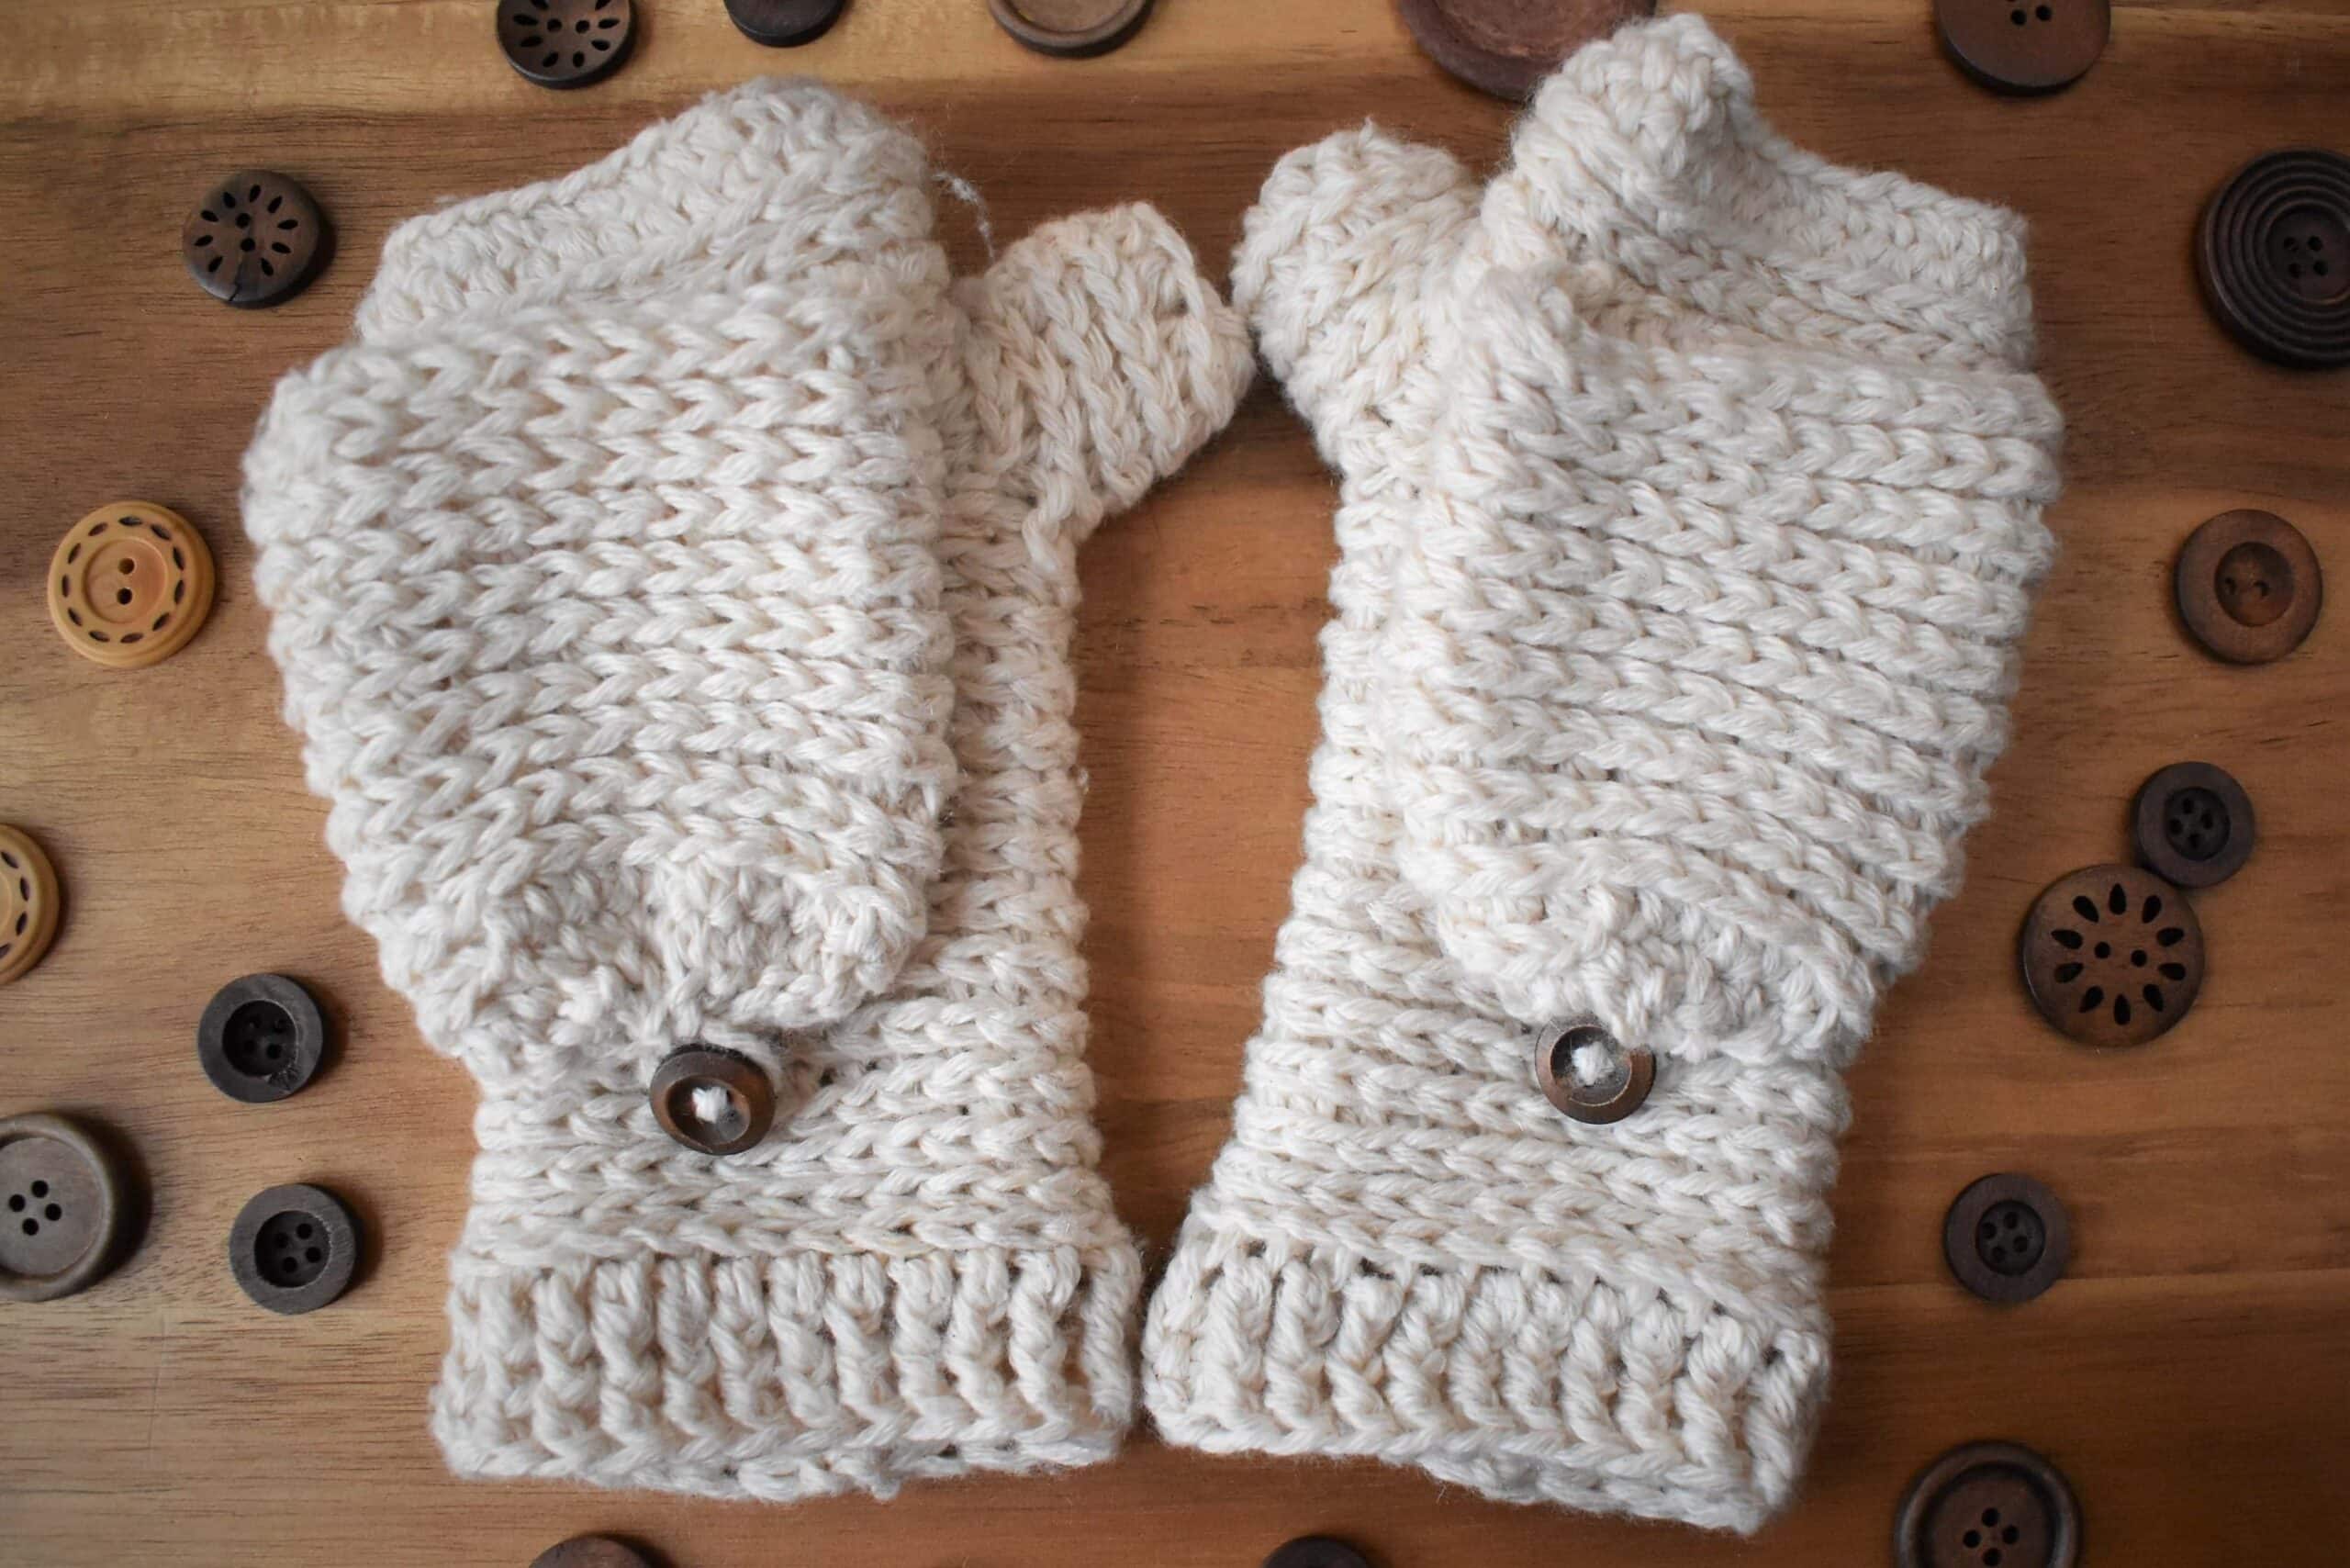 White crochet mittens on a wooden table with wood buttons scattered throughout.  Beautiful easy crochet mittens pattern